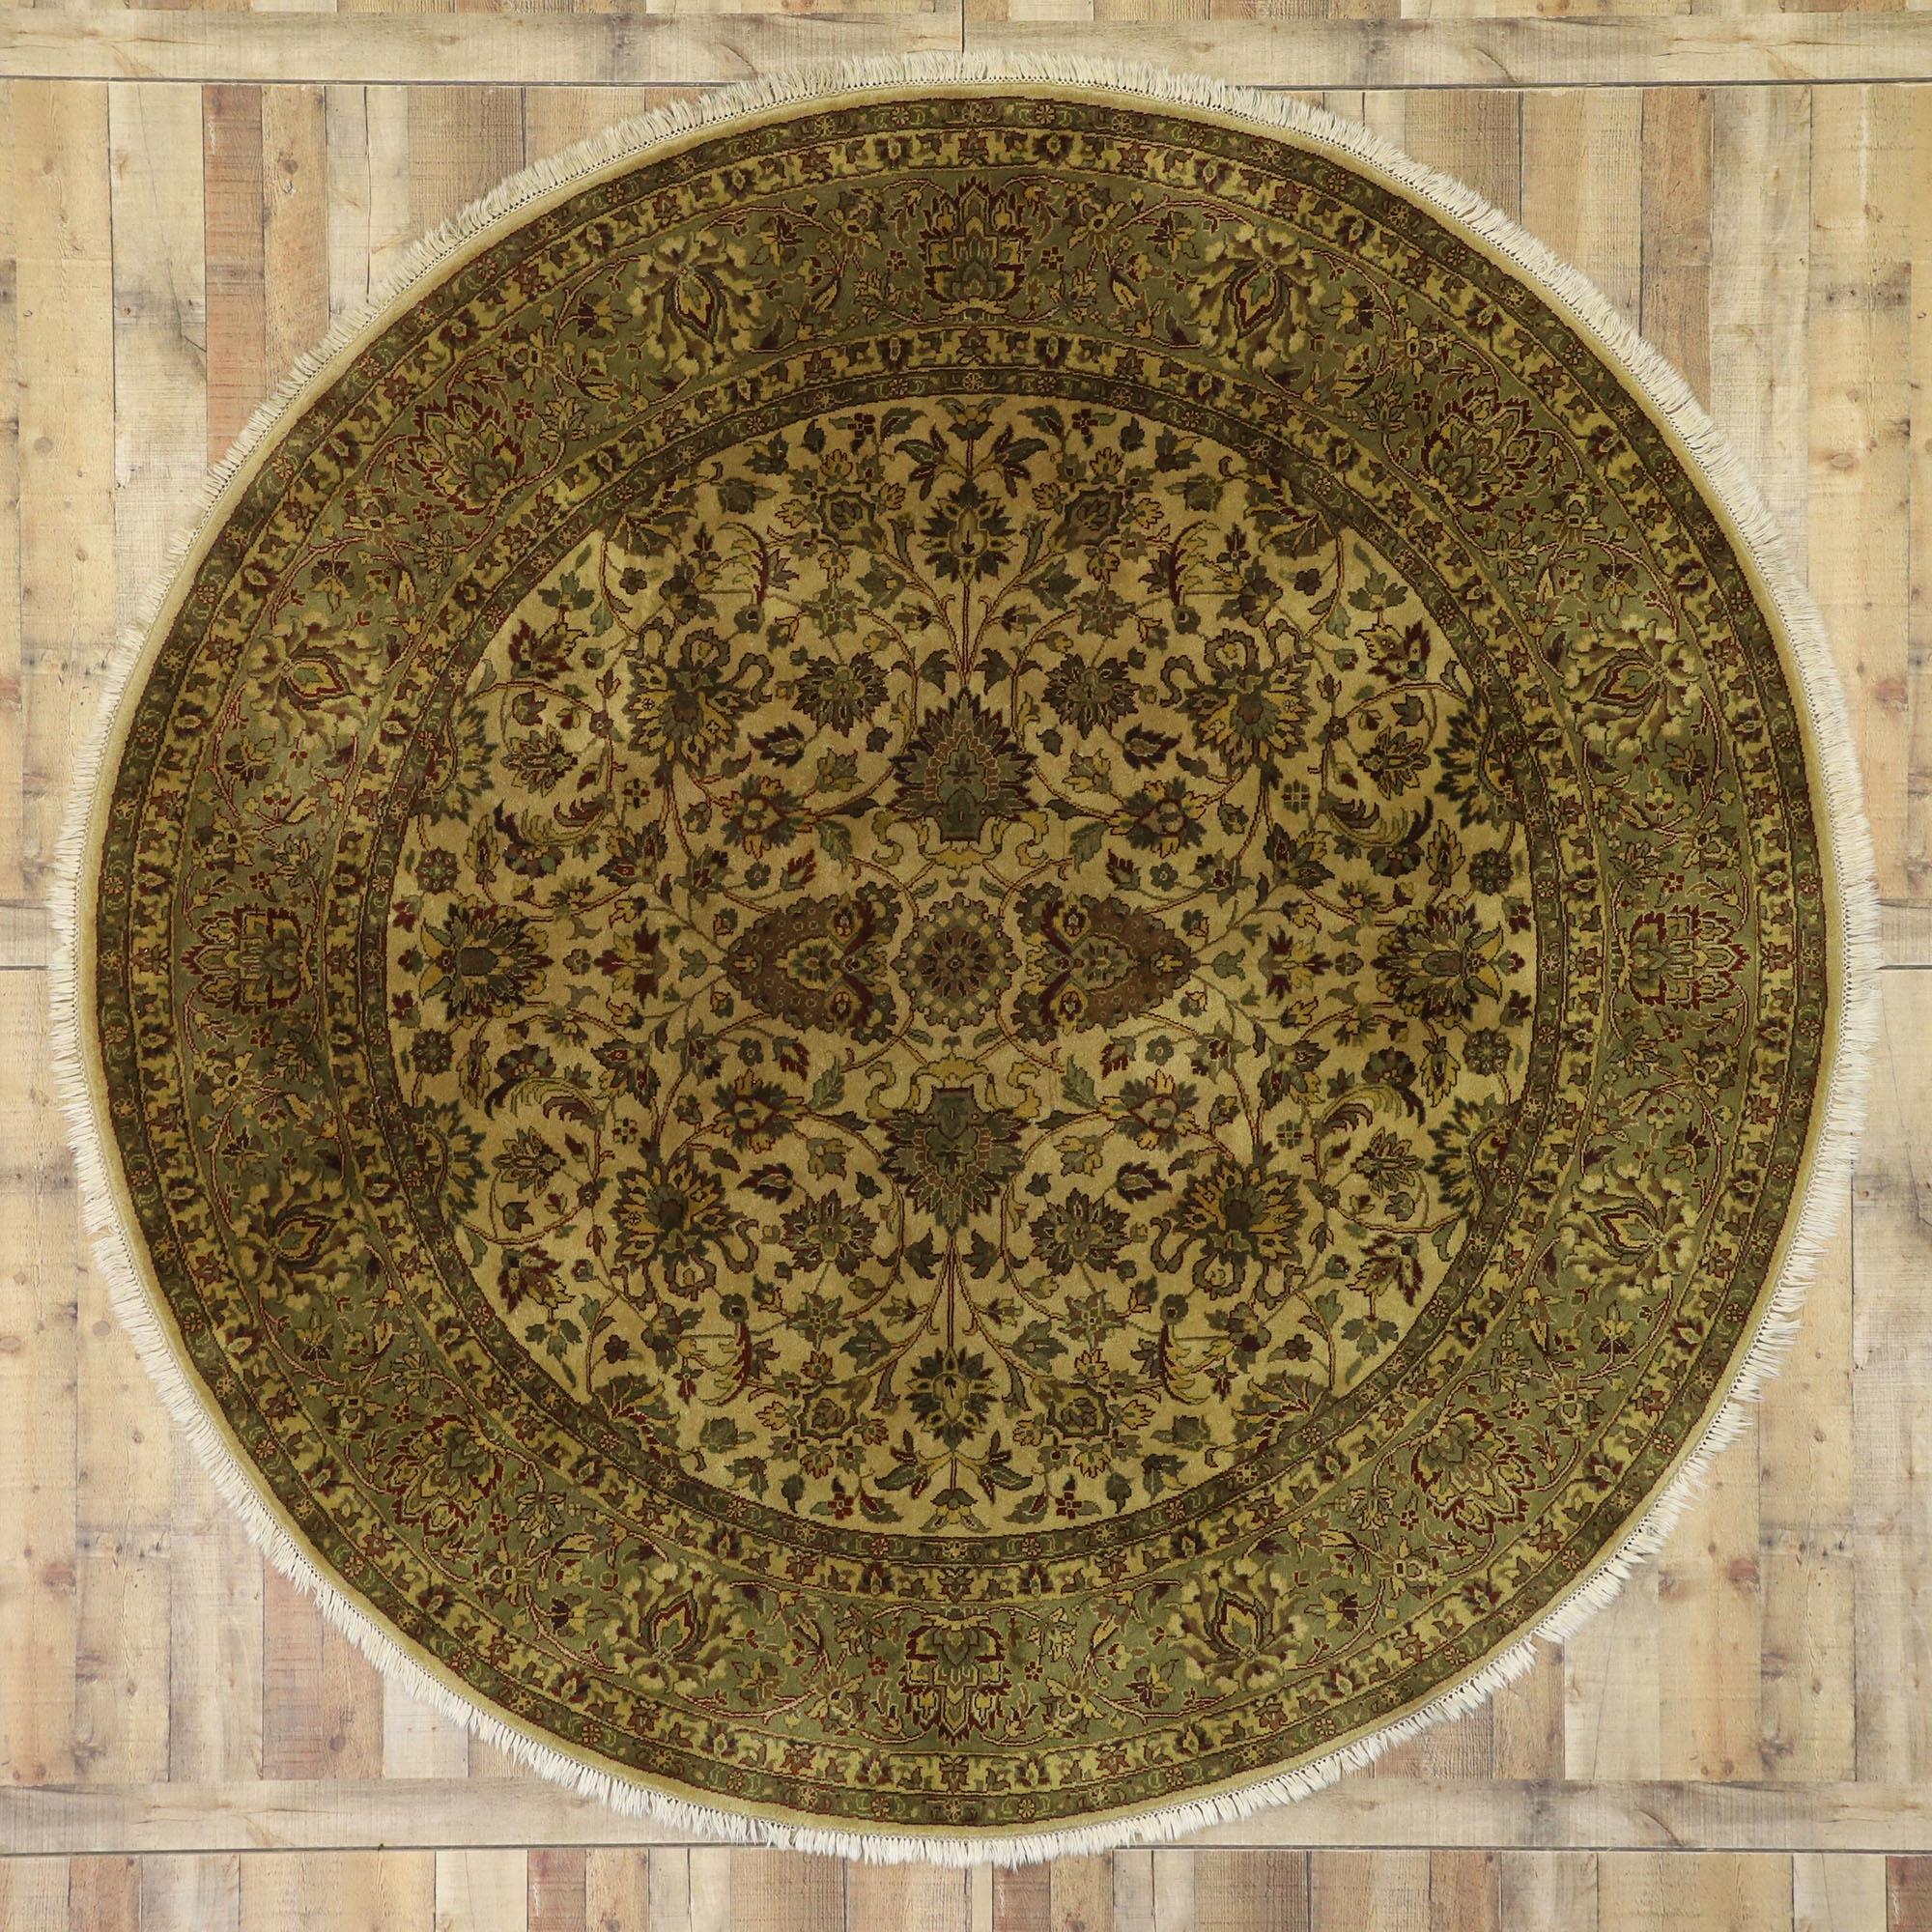 Vintage Indian Round Area Rug, Circular Rug with Traditional Style 1